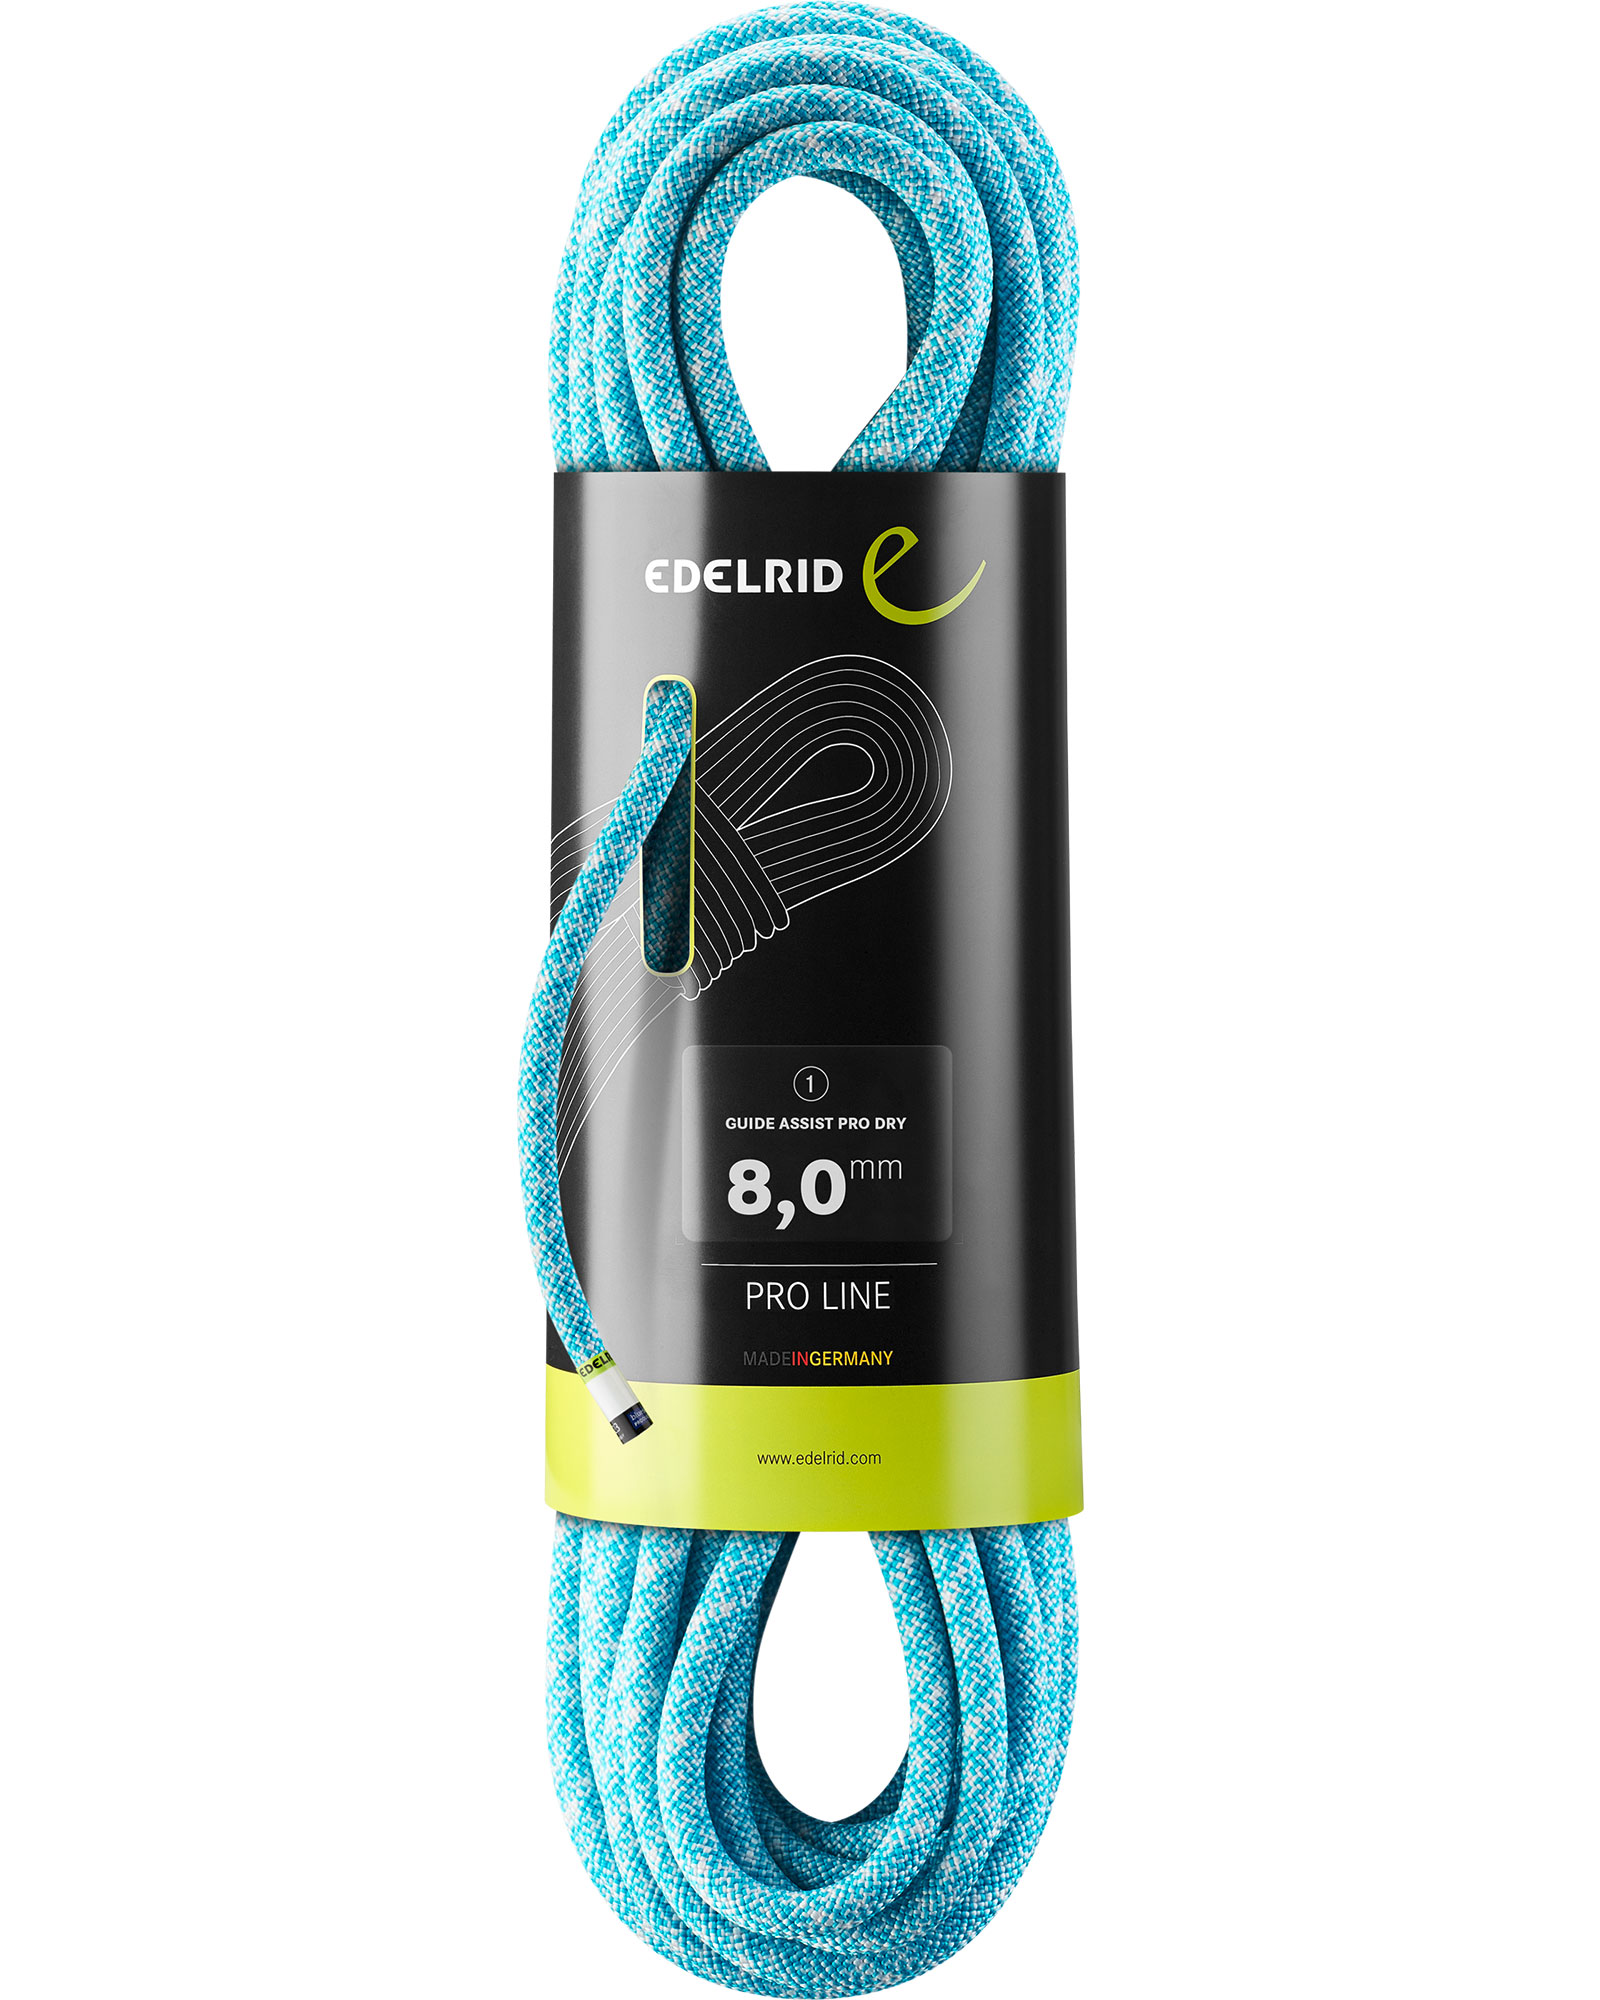 Edelrid Guide Assist Pro Dry 8.0 x 20 Rope - Icemint 20m